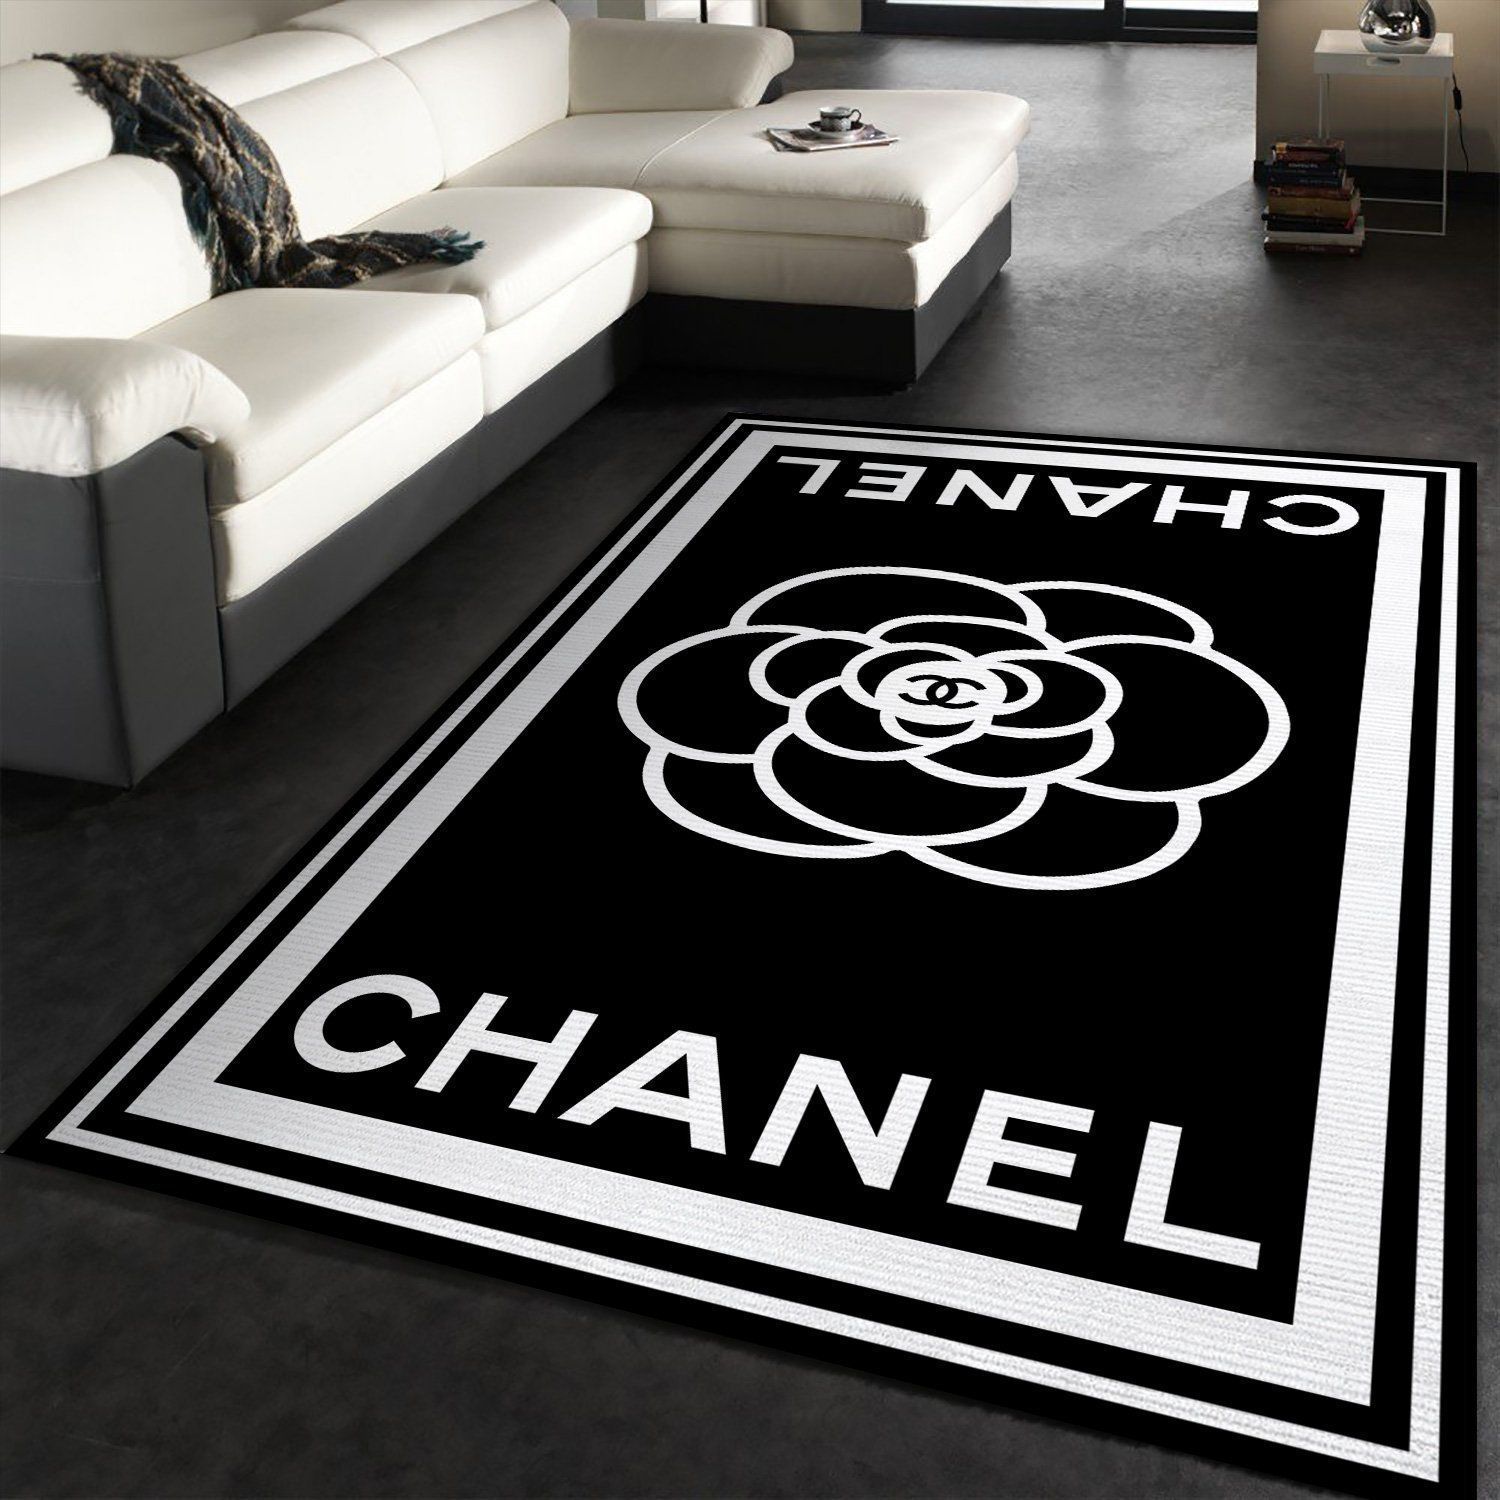 Chanel logo black and white living room area carpet living room rugs fn281002 the us decor - large ( 5 x 8 ft )